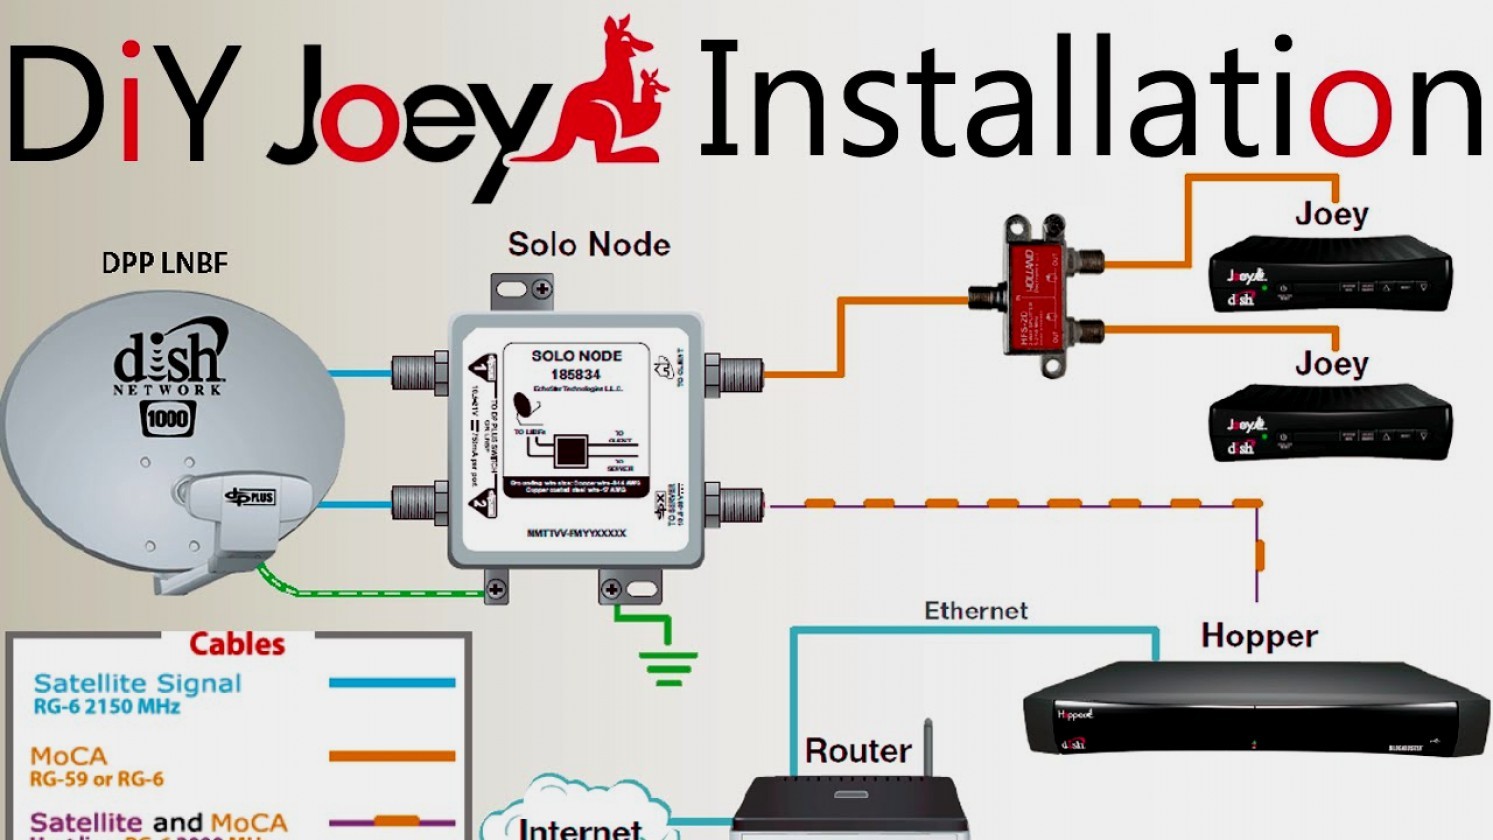 Dish Network Wiring Diagram DIY How To Install A Second Joey An Existing Hopper